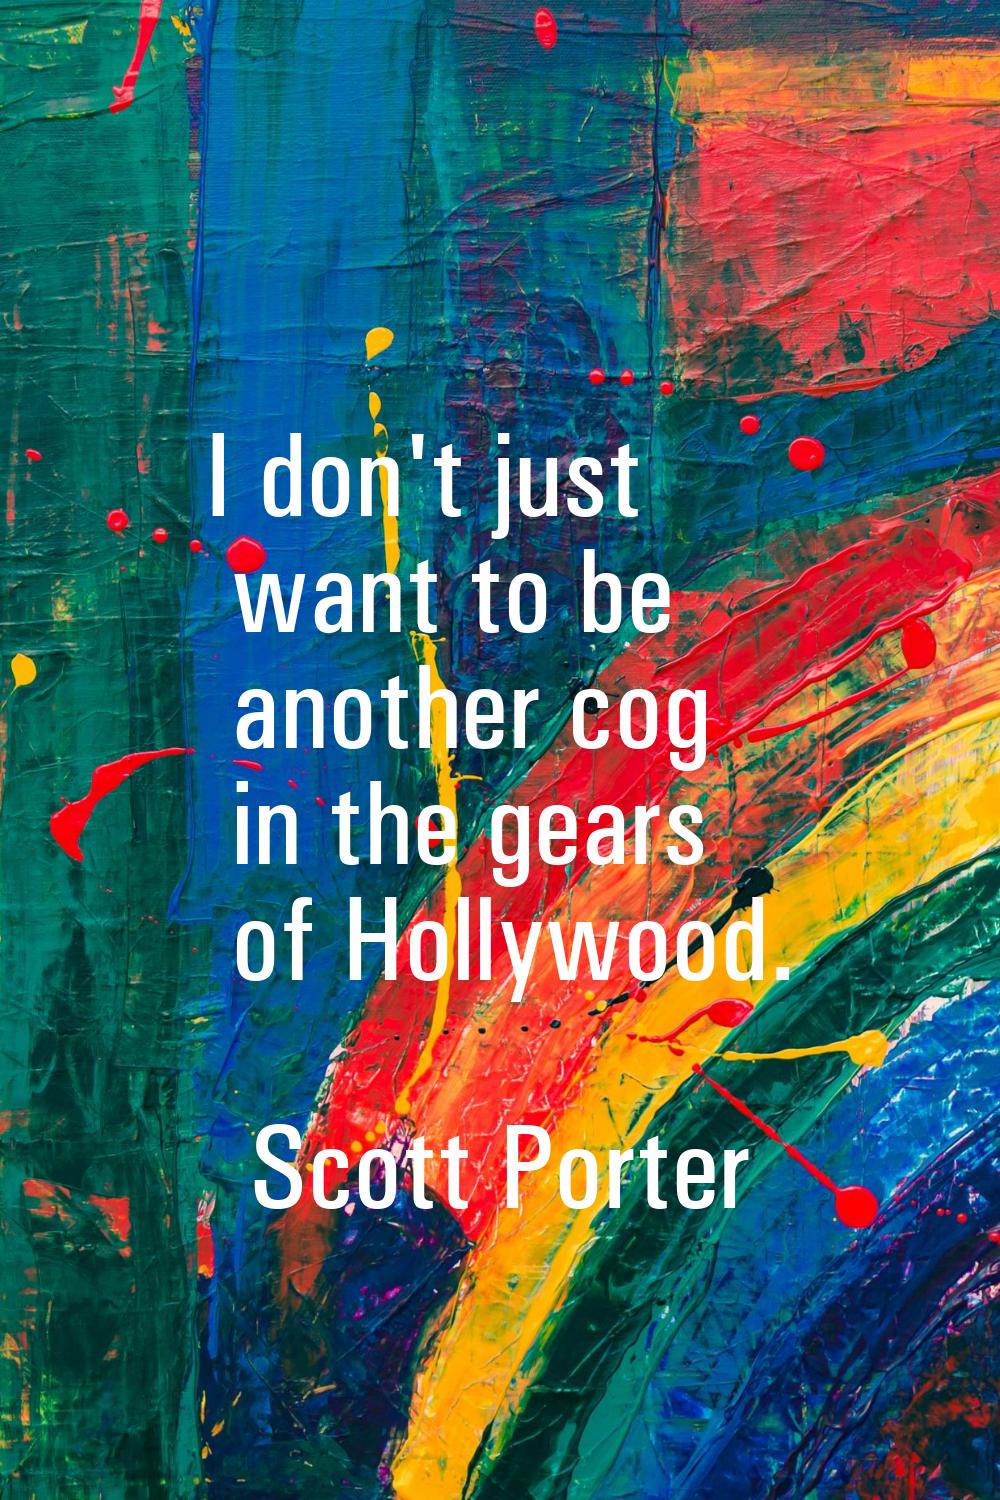 I don't just want to be another cog in the gears of Hollywood.